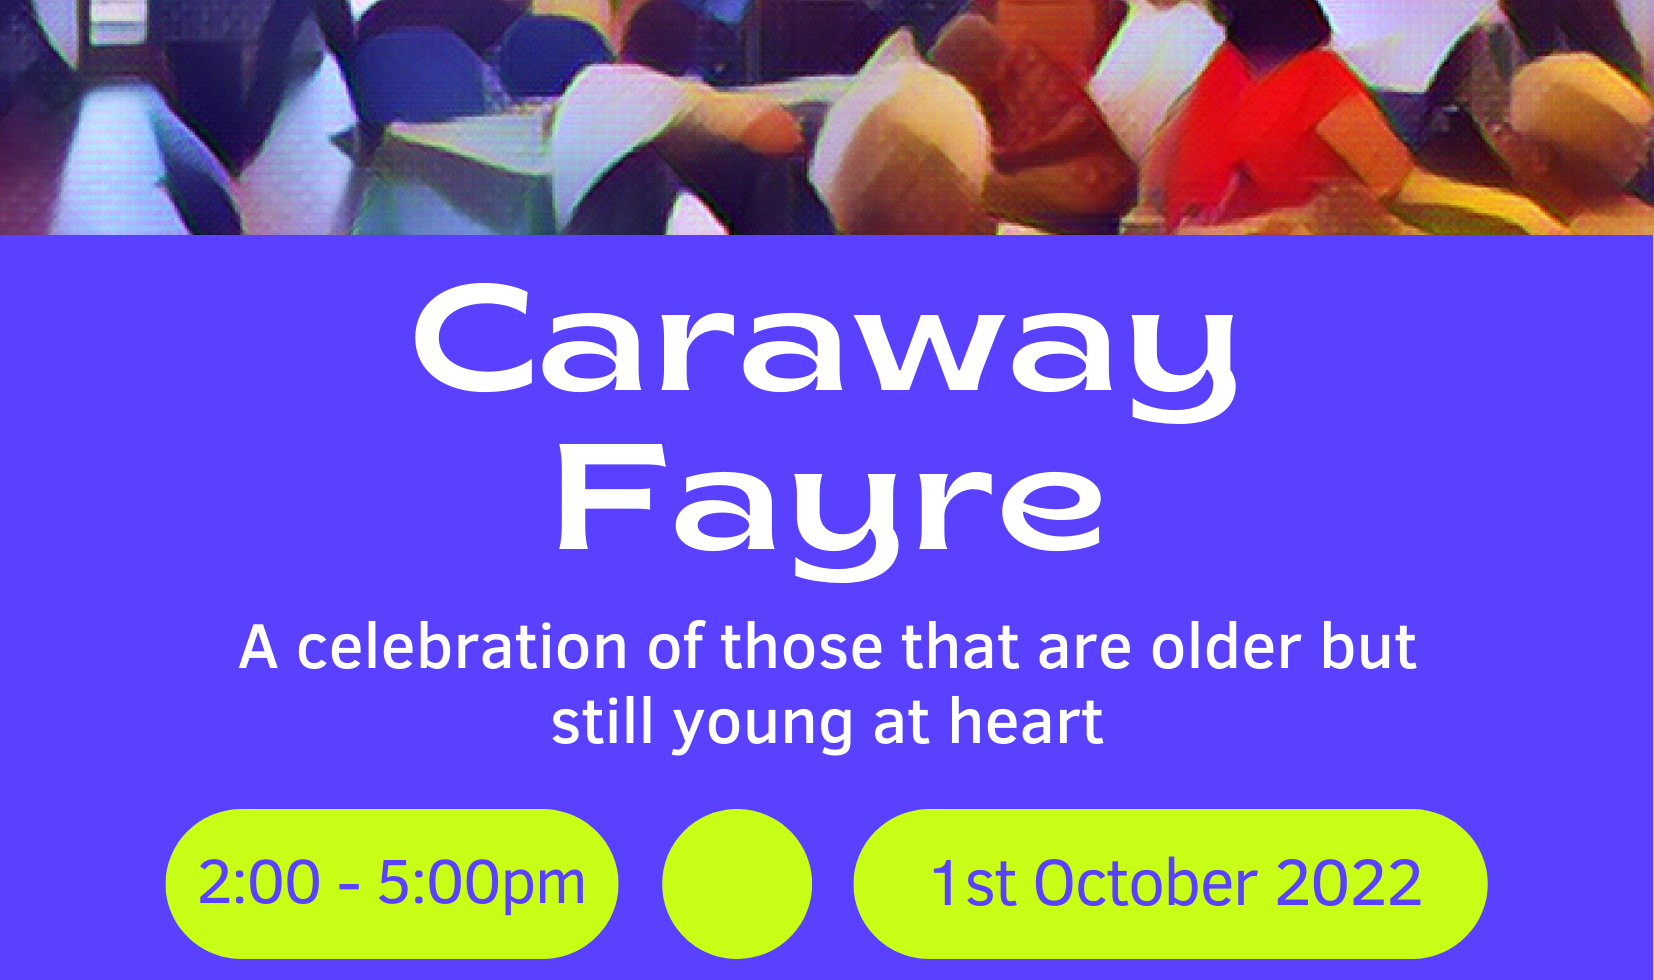 Save-the-Date-Caraway-Fayre-Oct22-1654x980.png">